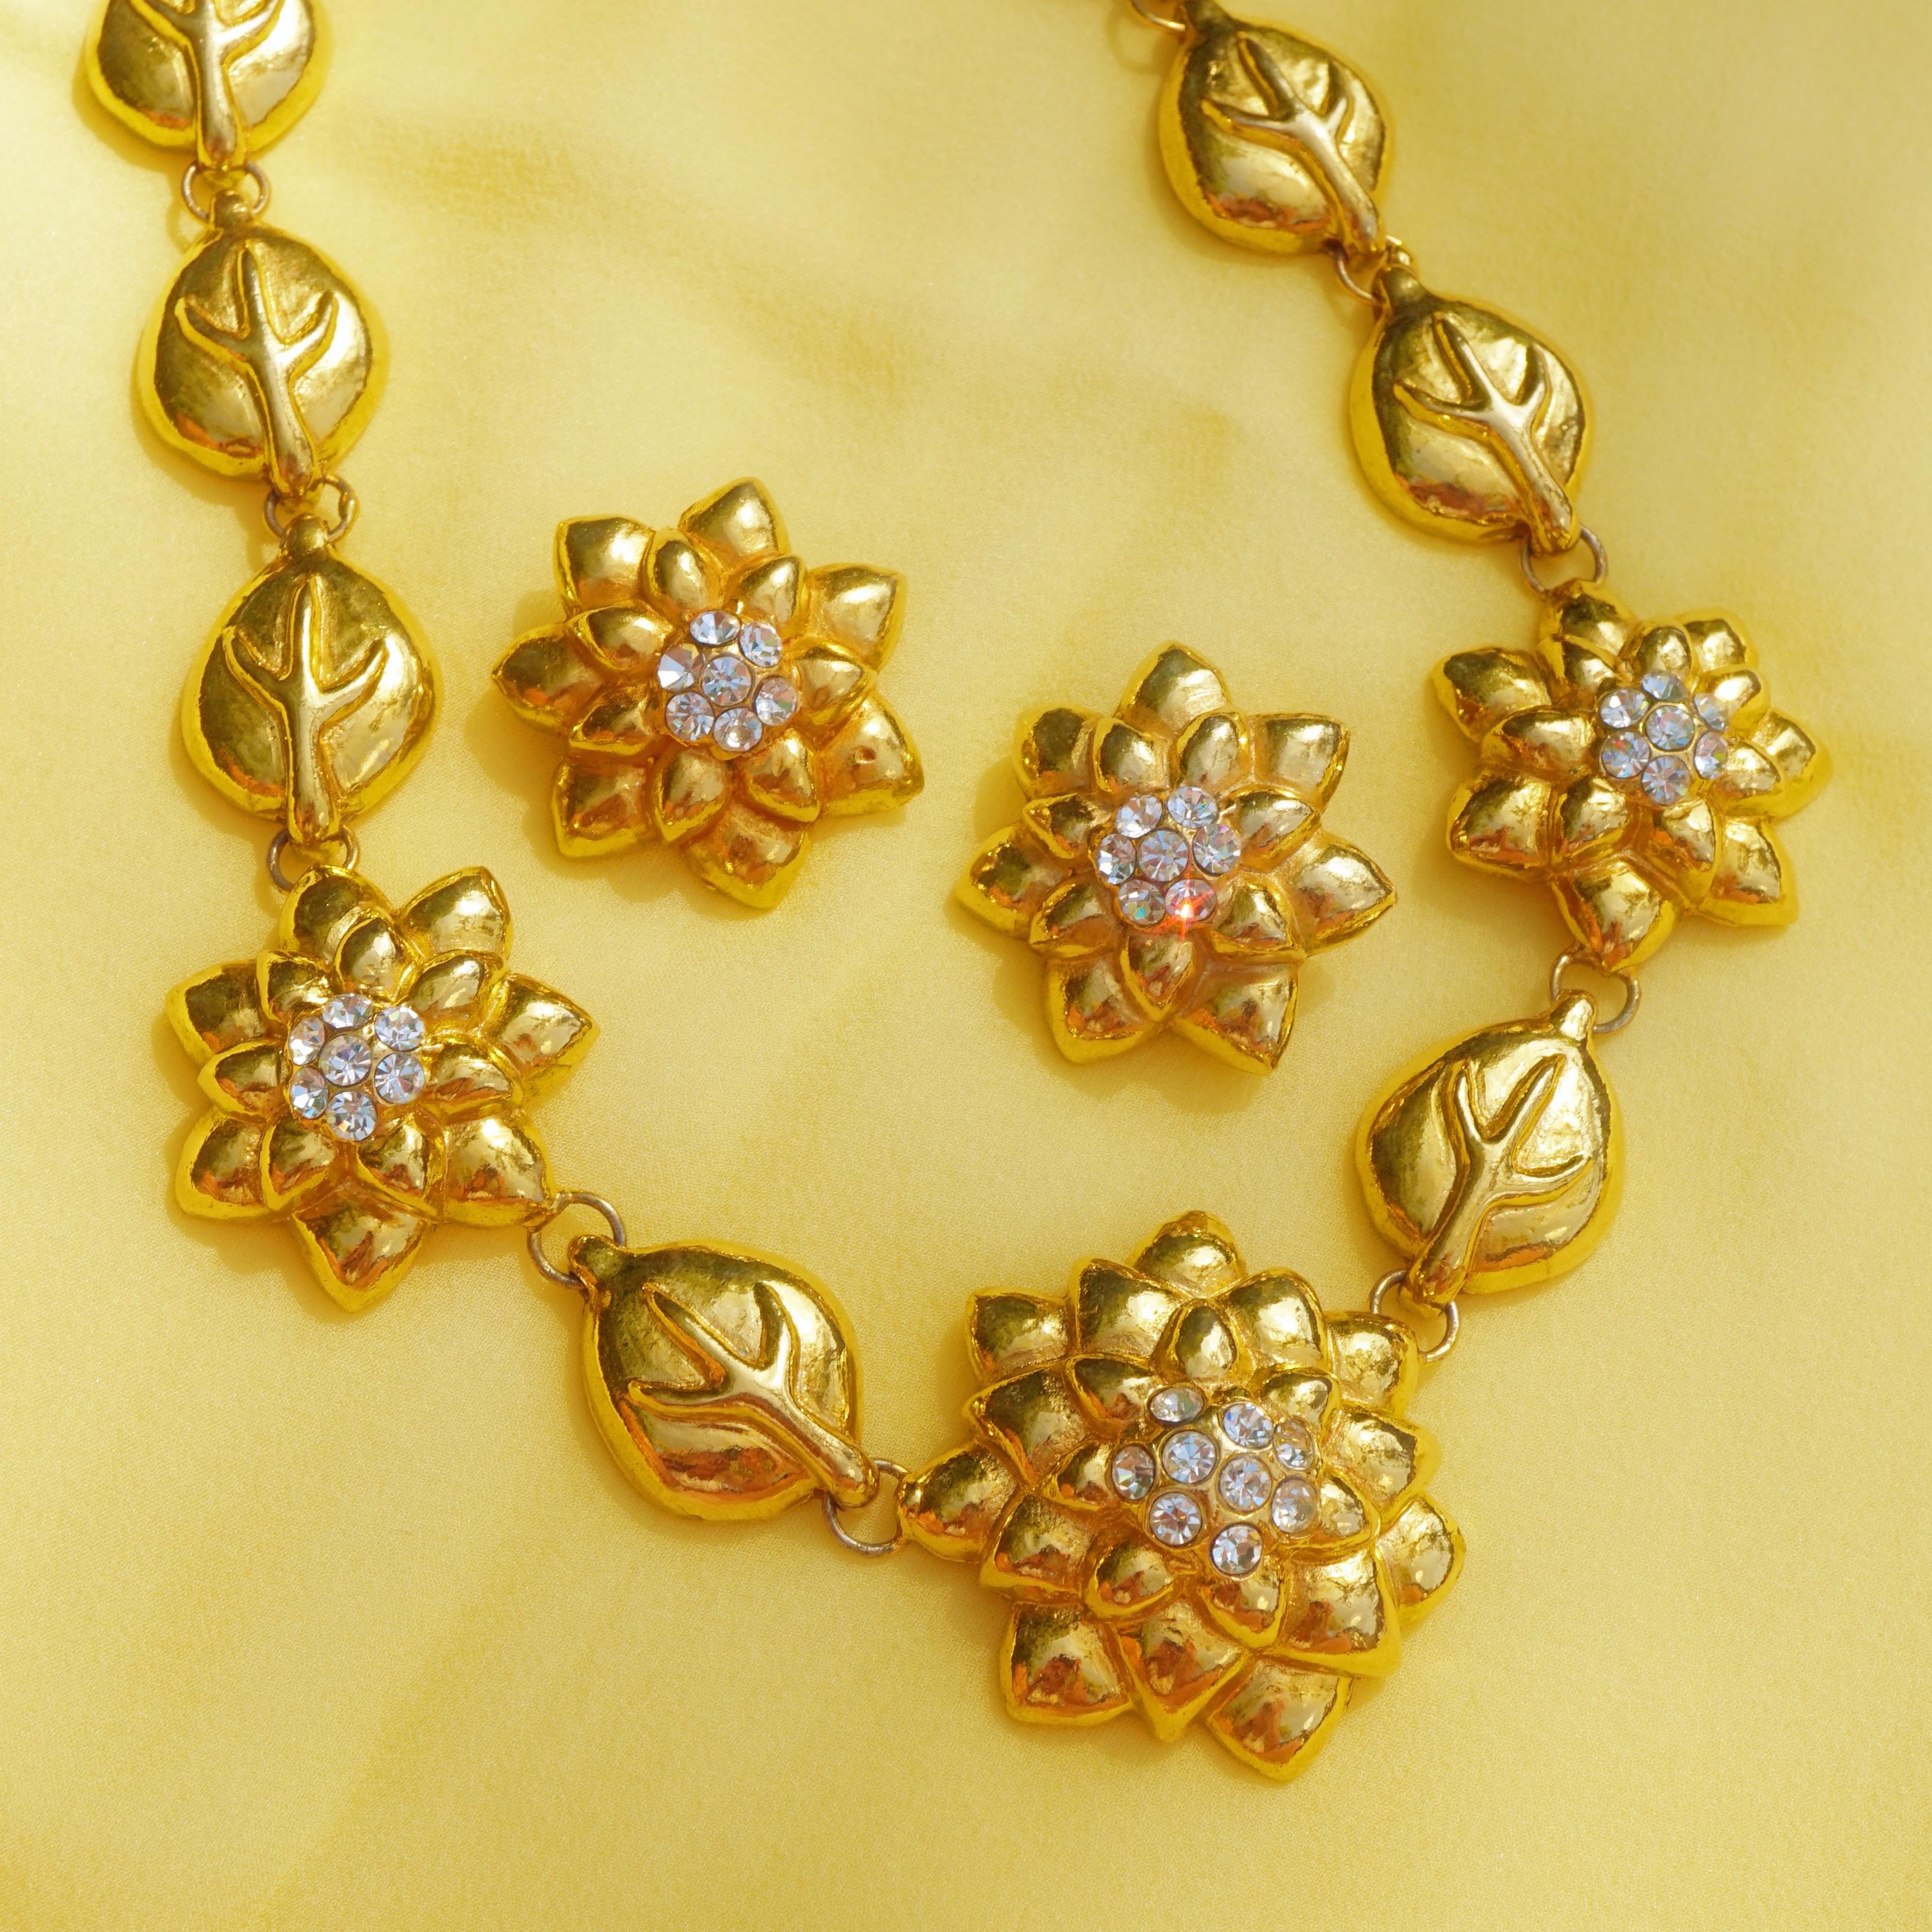 Important, immaculate and rare early Lorenz Baumer costume jewelry set featuring statement necklace and clip on earrings with floral motif.  This exceptional set was made prior to his illustrious career in fine jewelry,

- Necklace measures 18